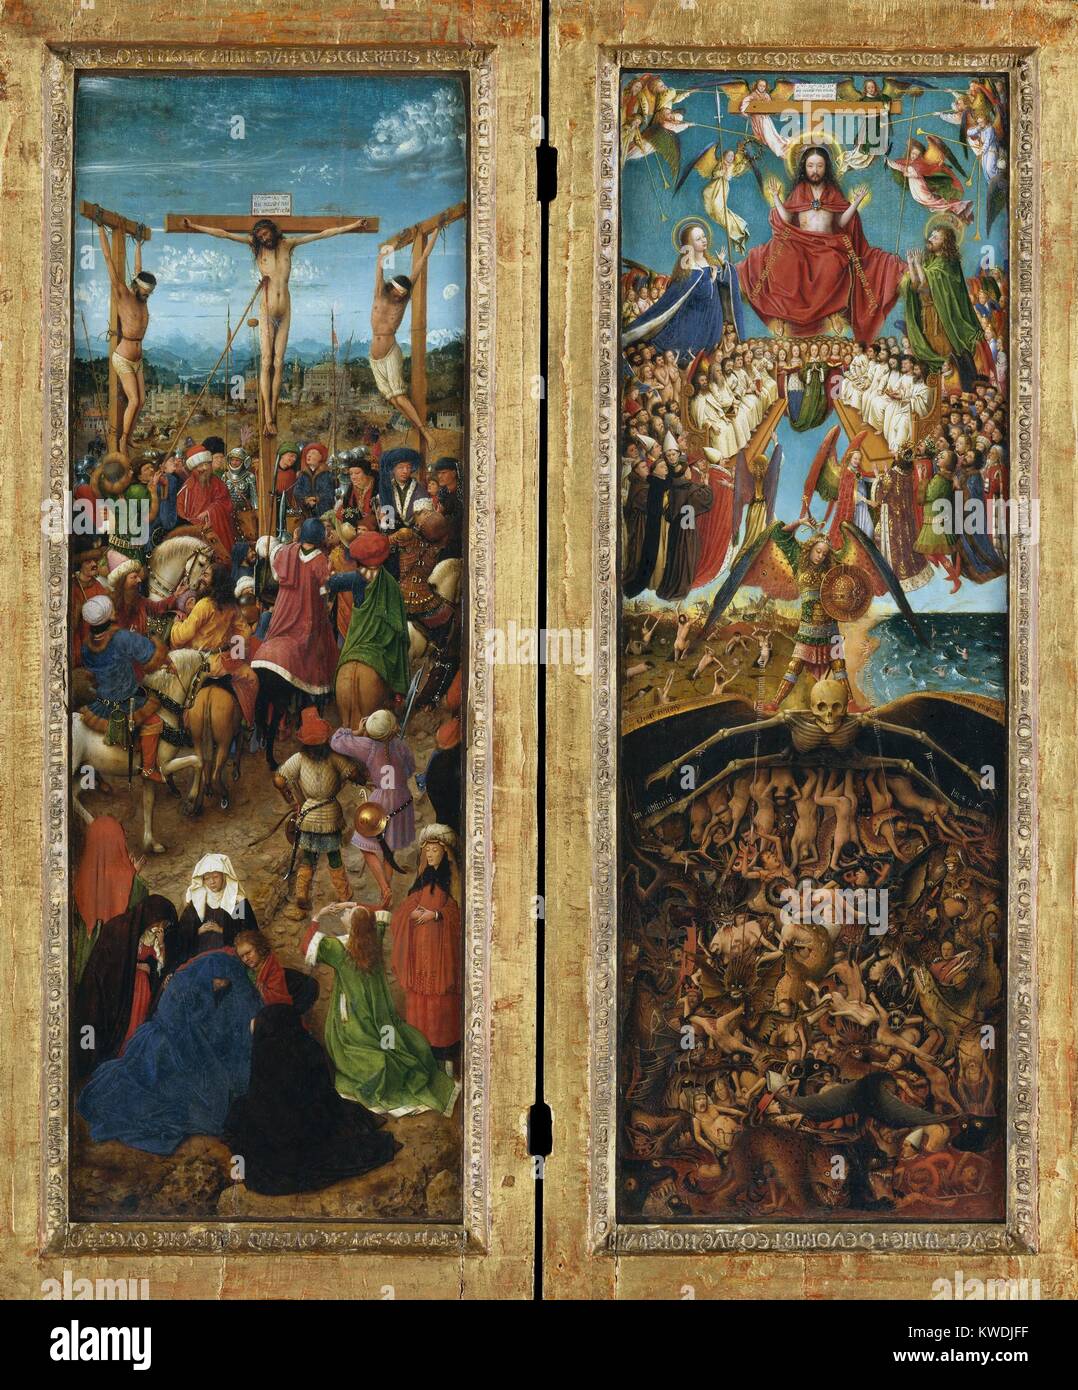 THE CRUCIFIXION, THE LAST JUDGMENT, by Jan van Eyck, 1440-41, Northern Renaissance painting. In this masterpiece of Renaissance art, the naturalism of a landscape setting replaced the gold ground of Italian painting. In the left panel, Van Eyck depicted the Crucifixion as it would take place in his contemporary 15th century world (BSLOC 2017 16 106) Stock Photo